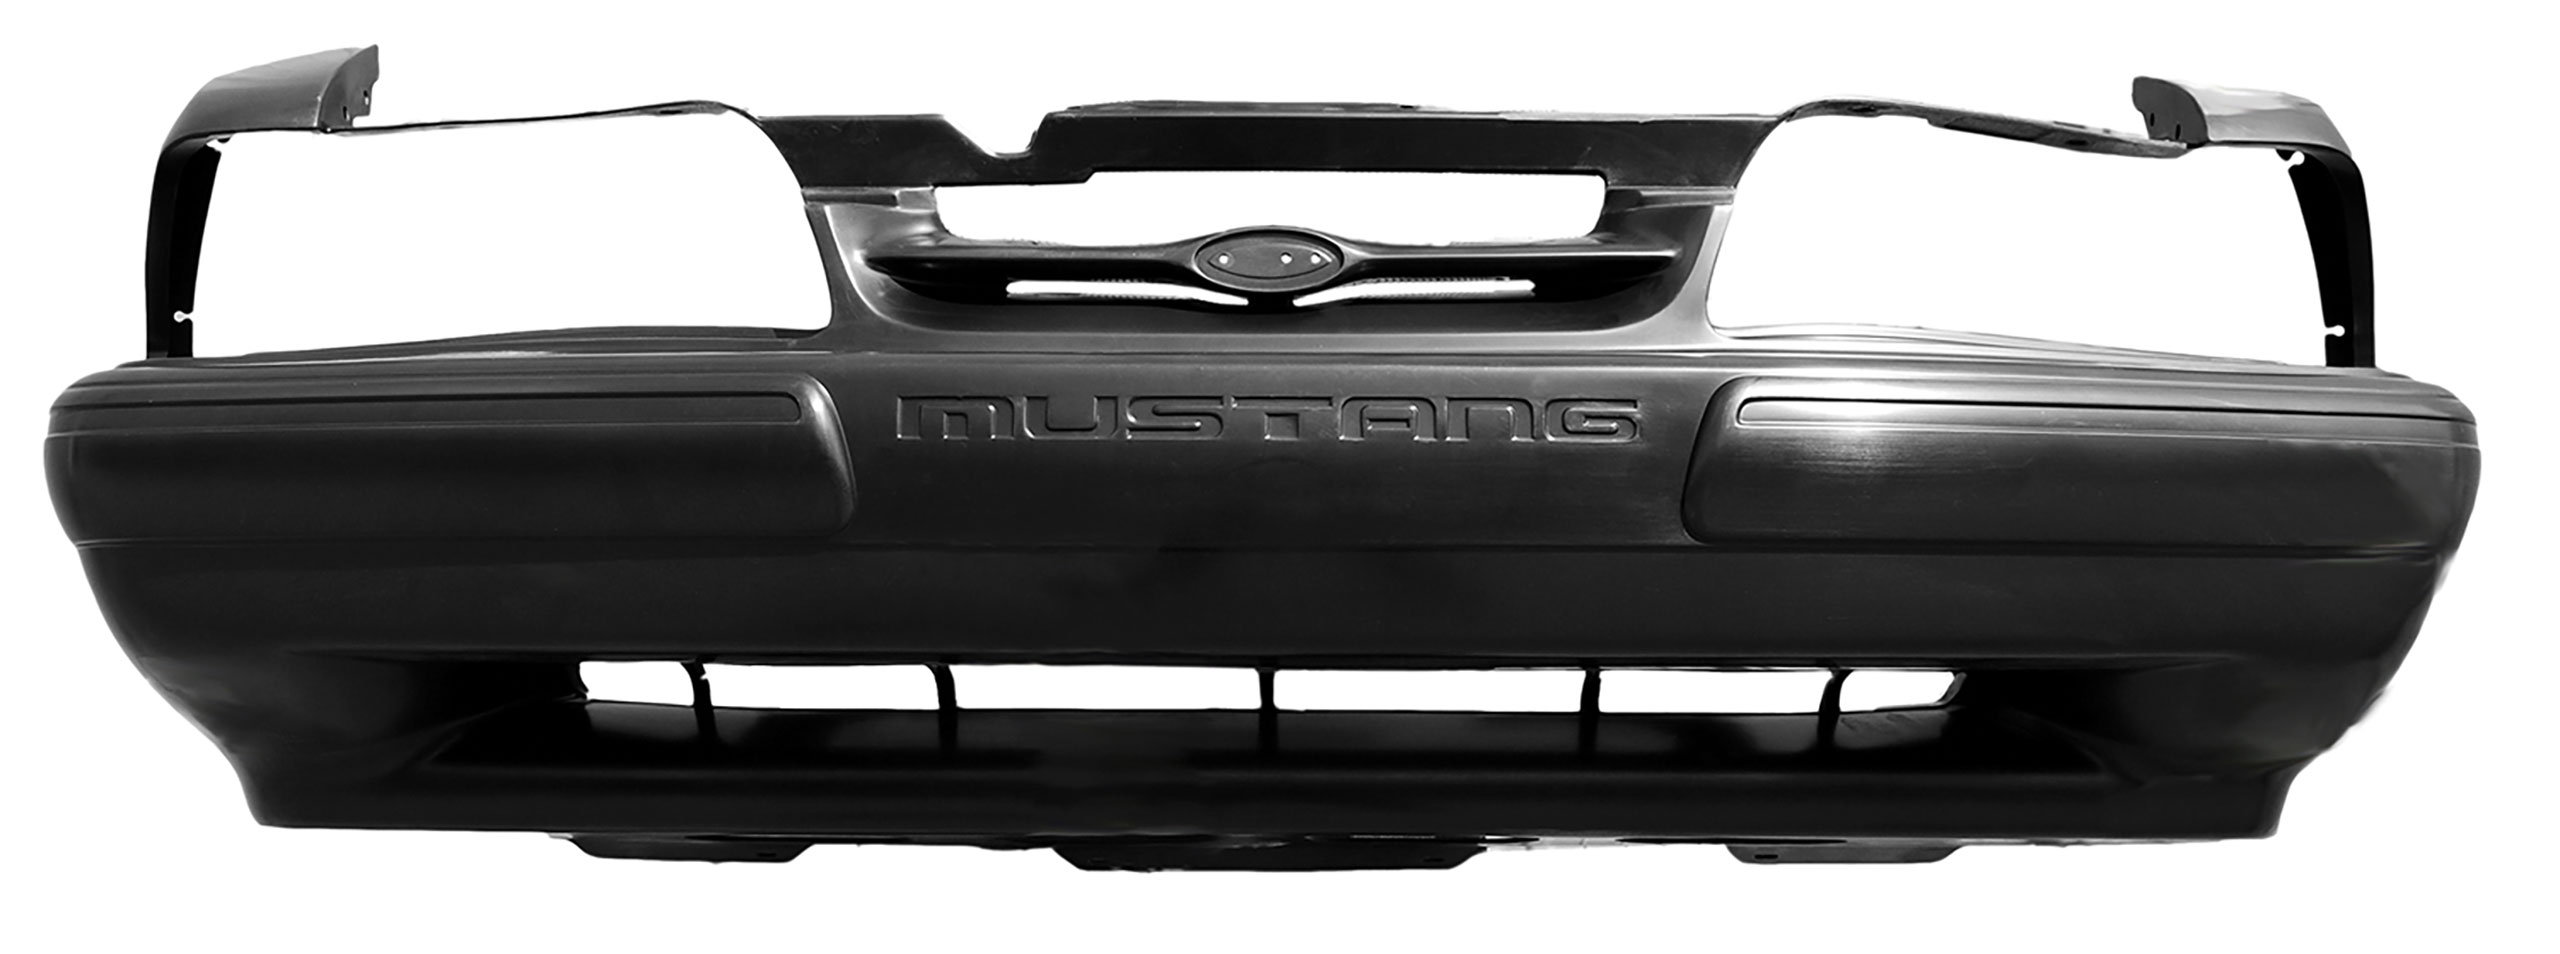 Third Generation 1987-1993 Ford Mustang Front Bumper Cover - LX - Daniel Carpenter